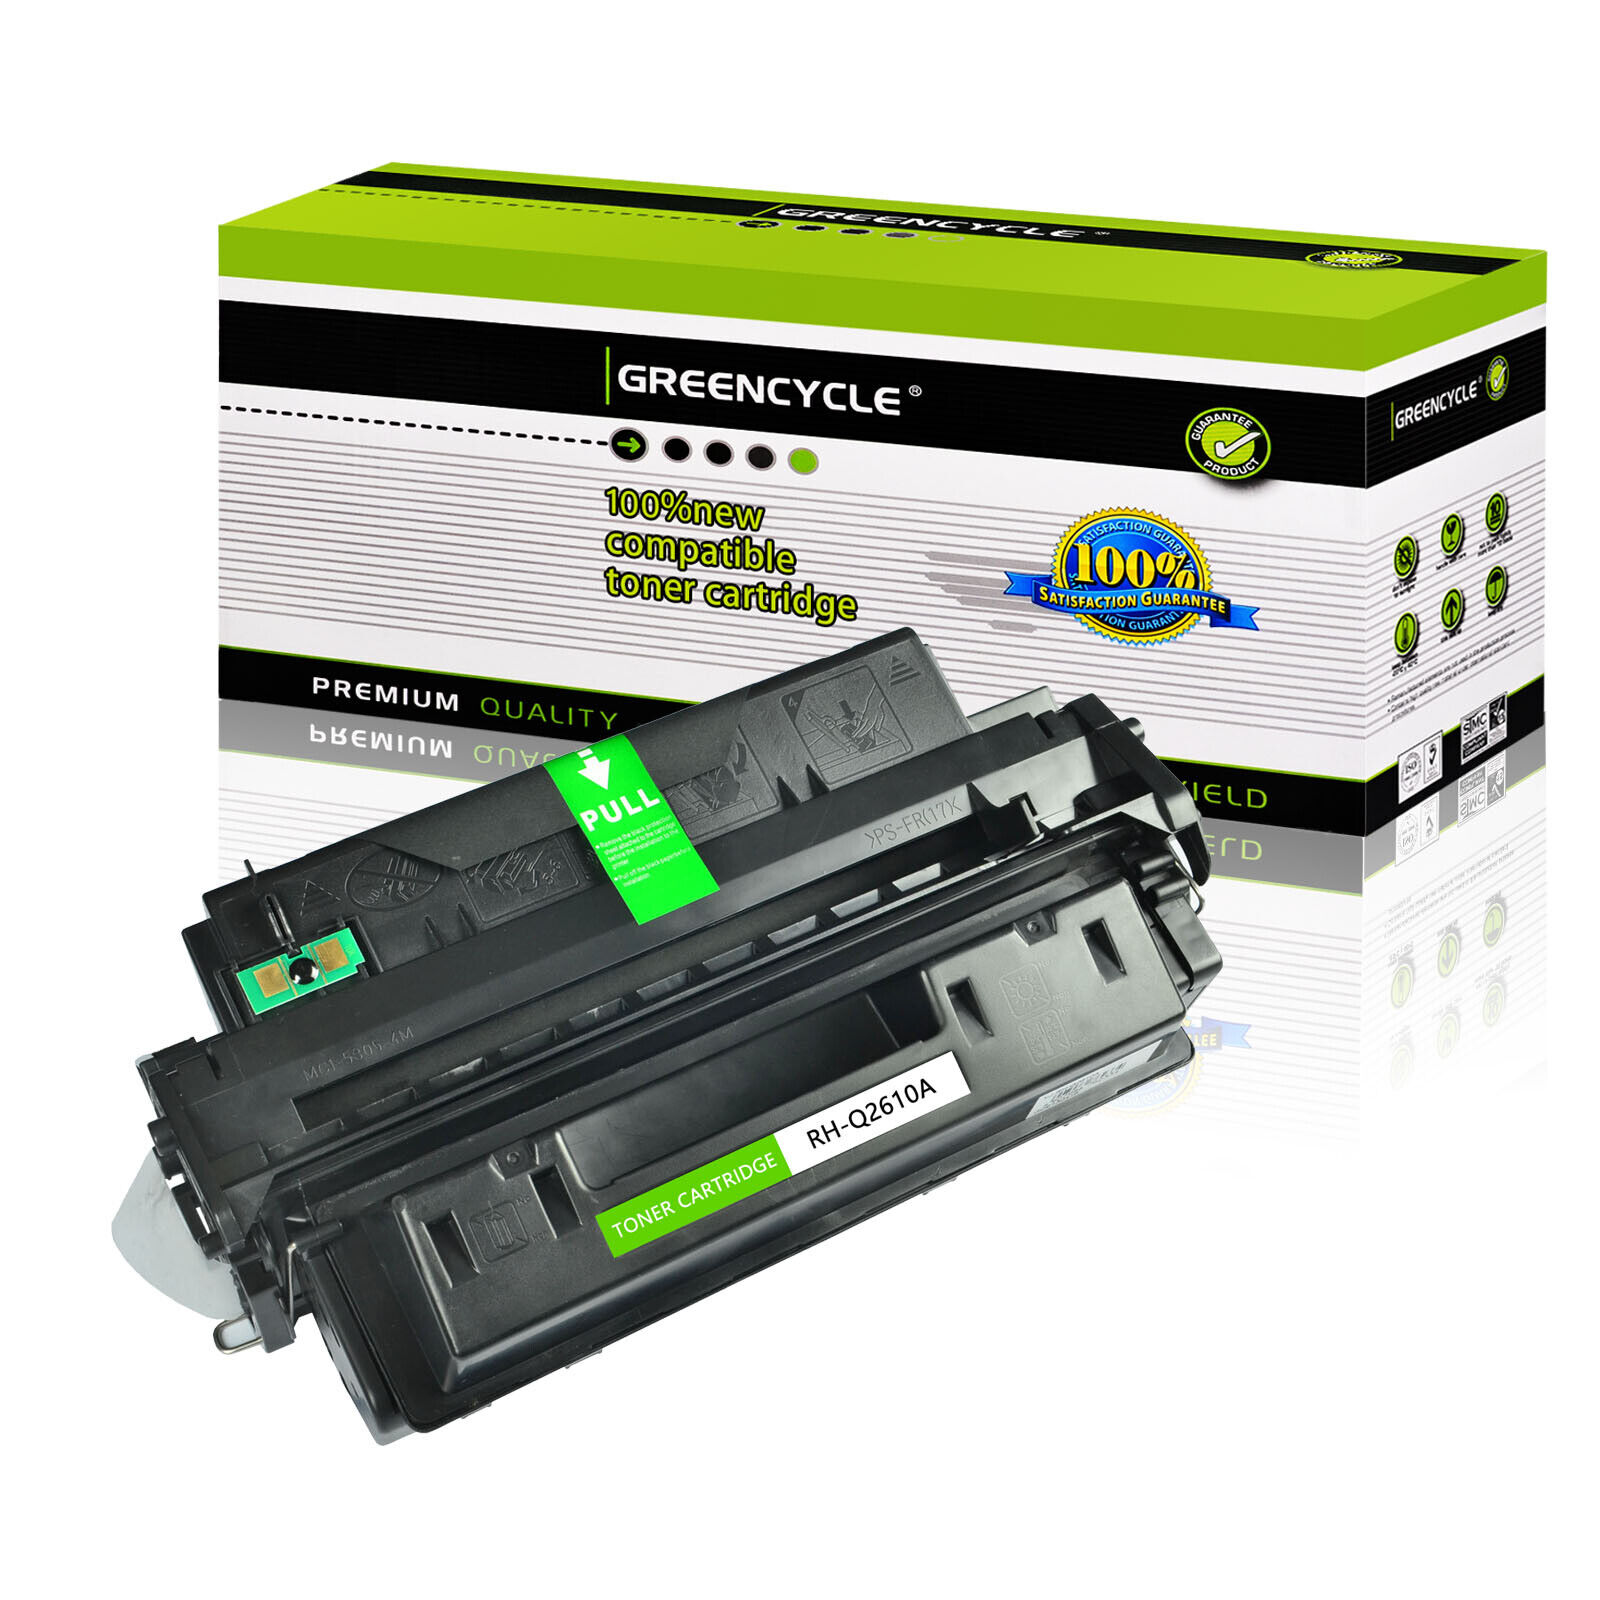 10A Q2610A Compatible HP Toner Cartridge Lot Work with HP LaserJet 2300 Printer